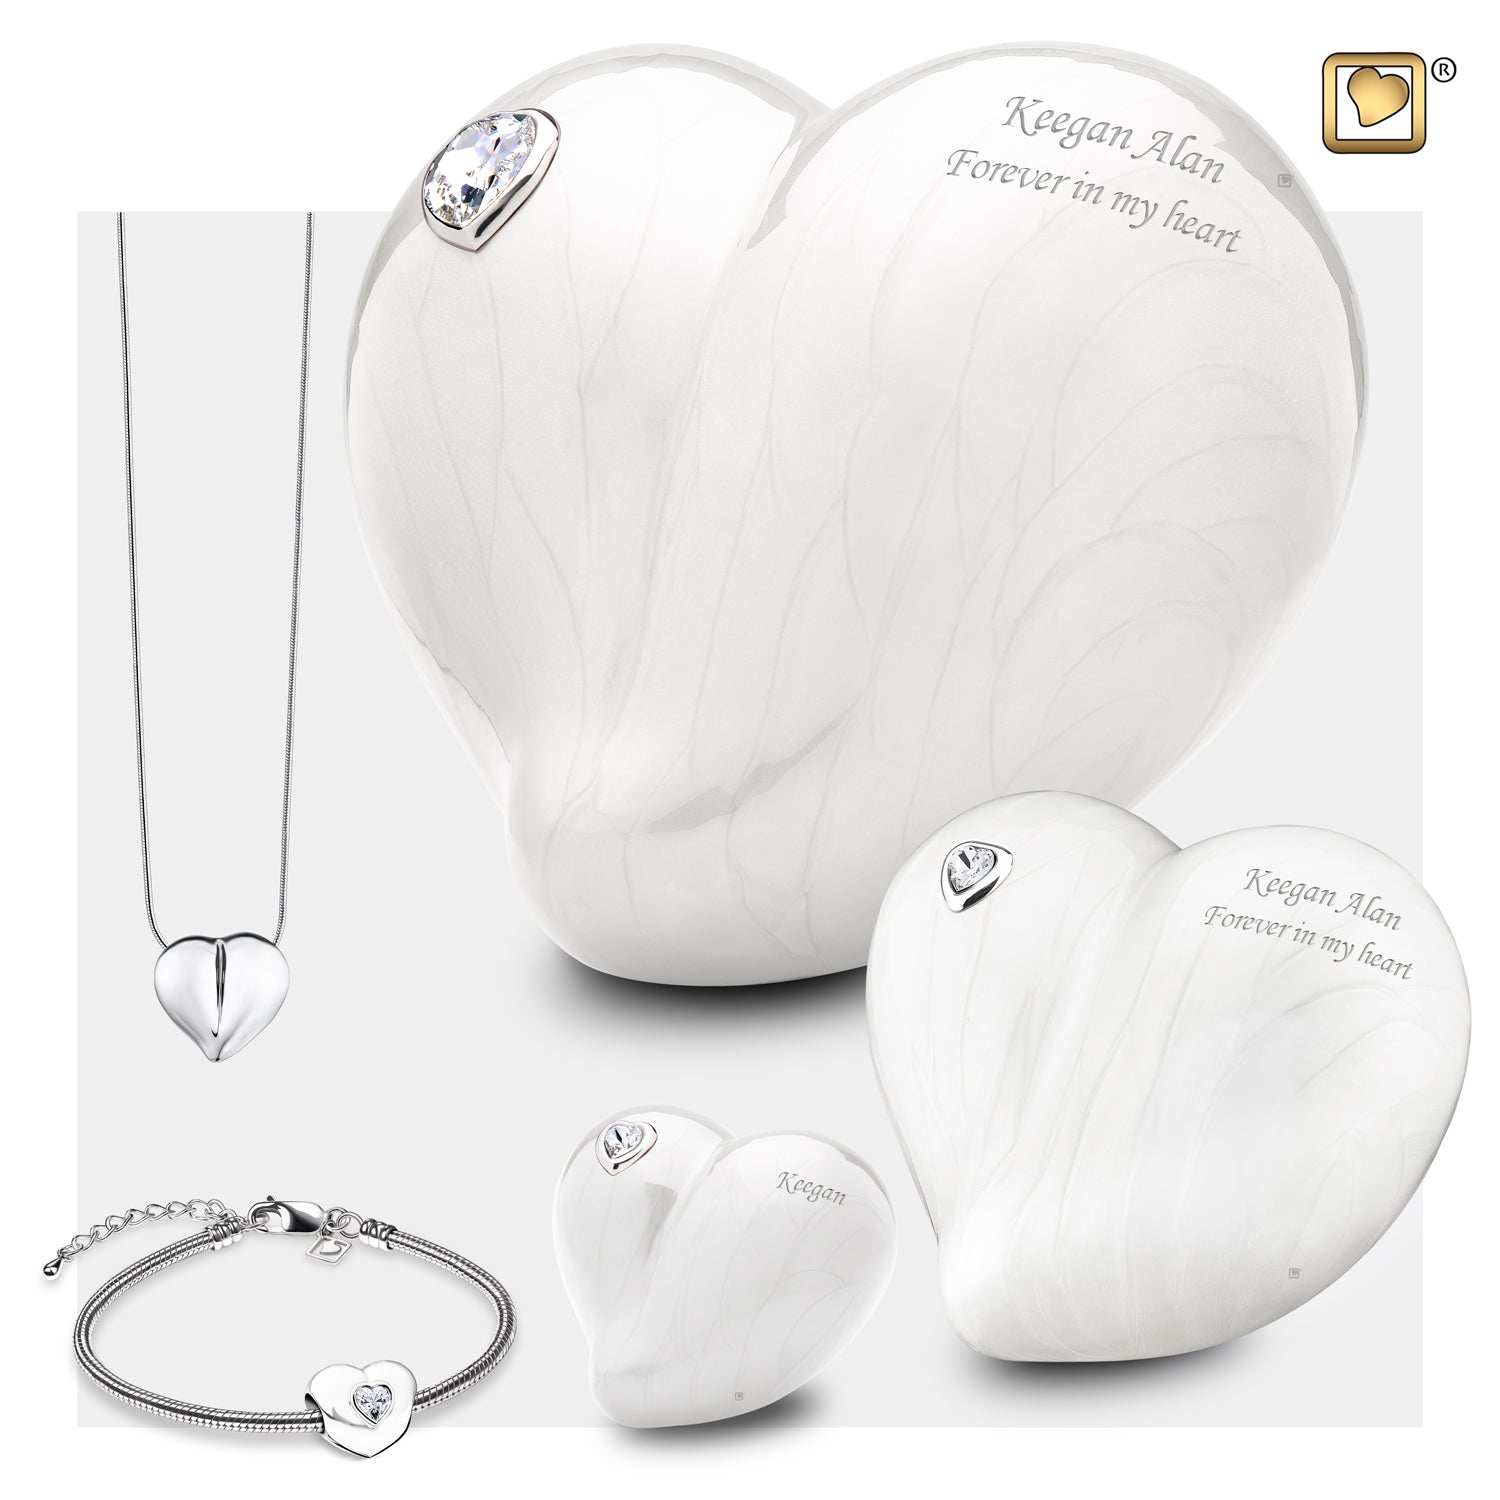 Adult LoveHeart Shaped Pearl Cremation Urn